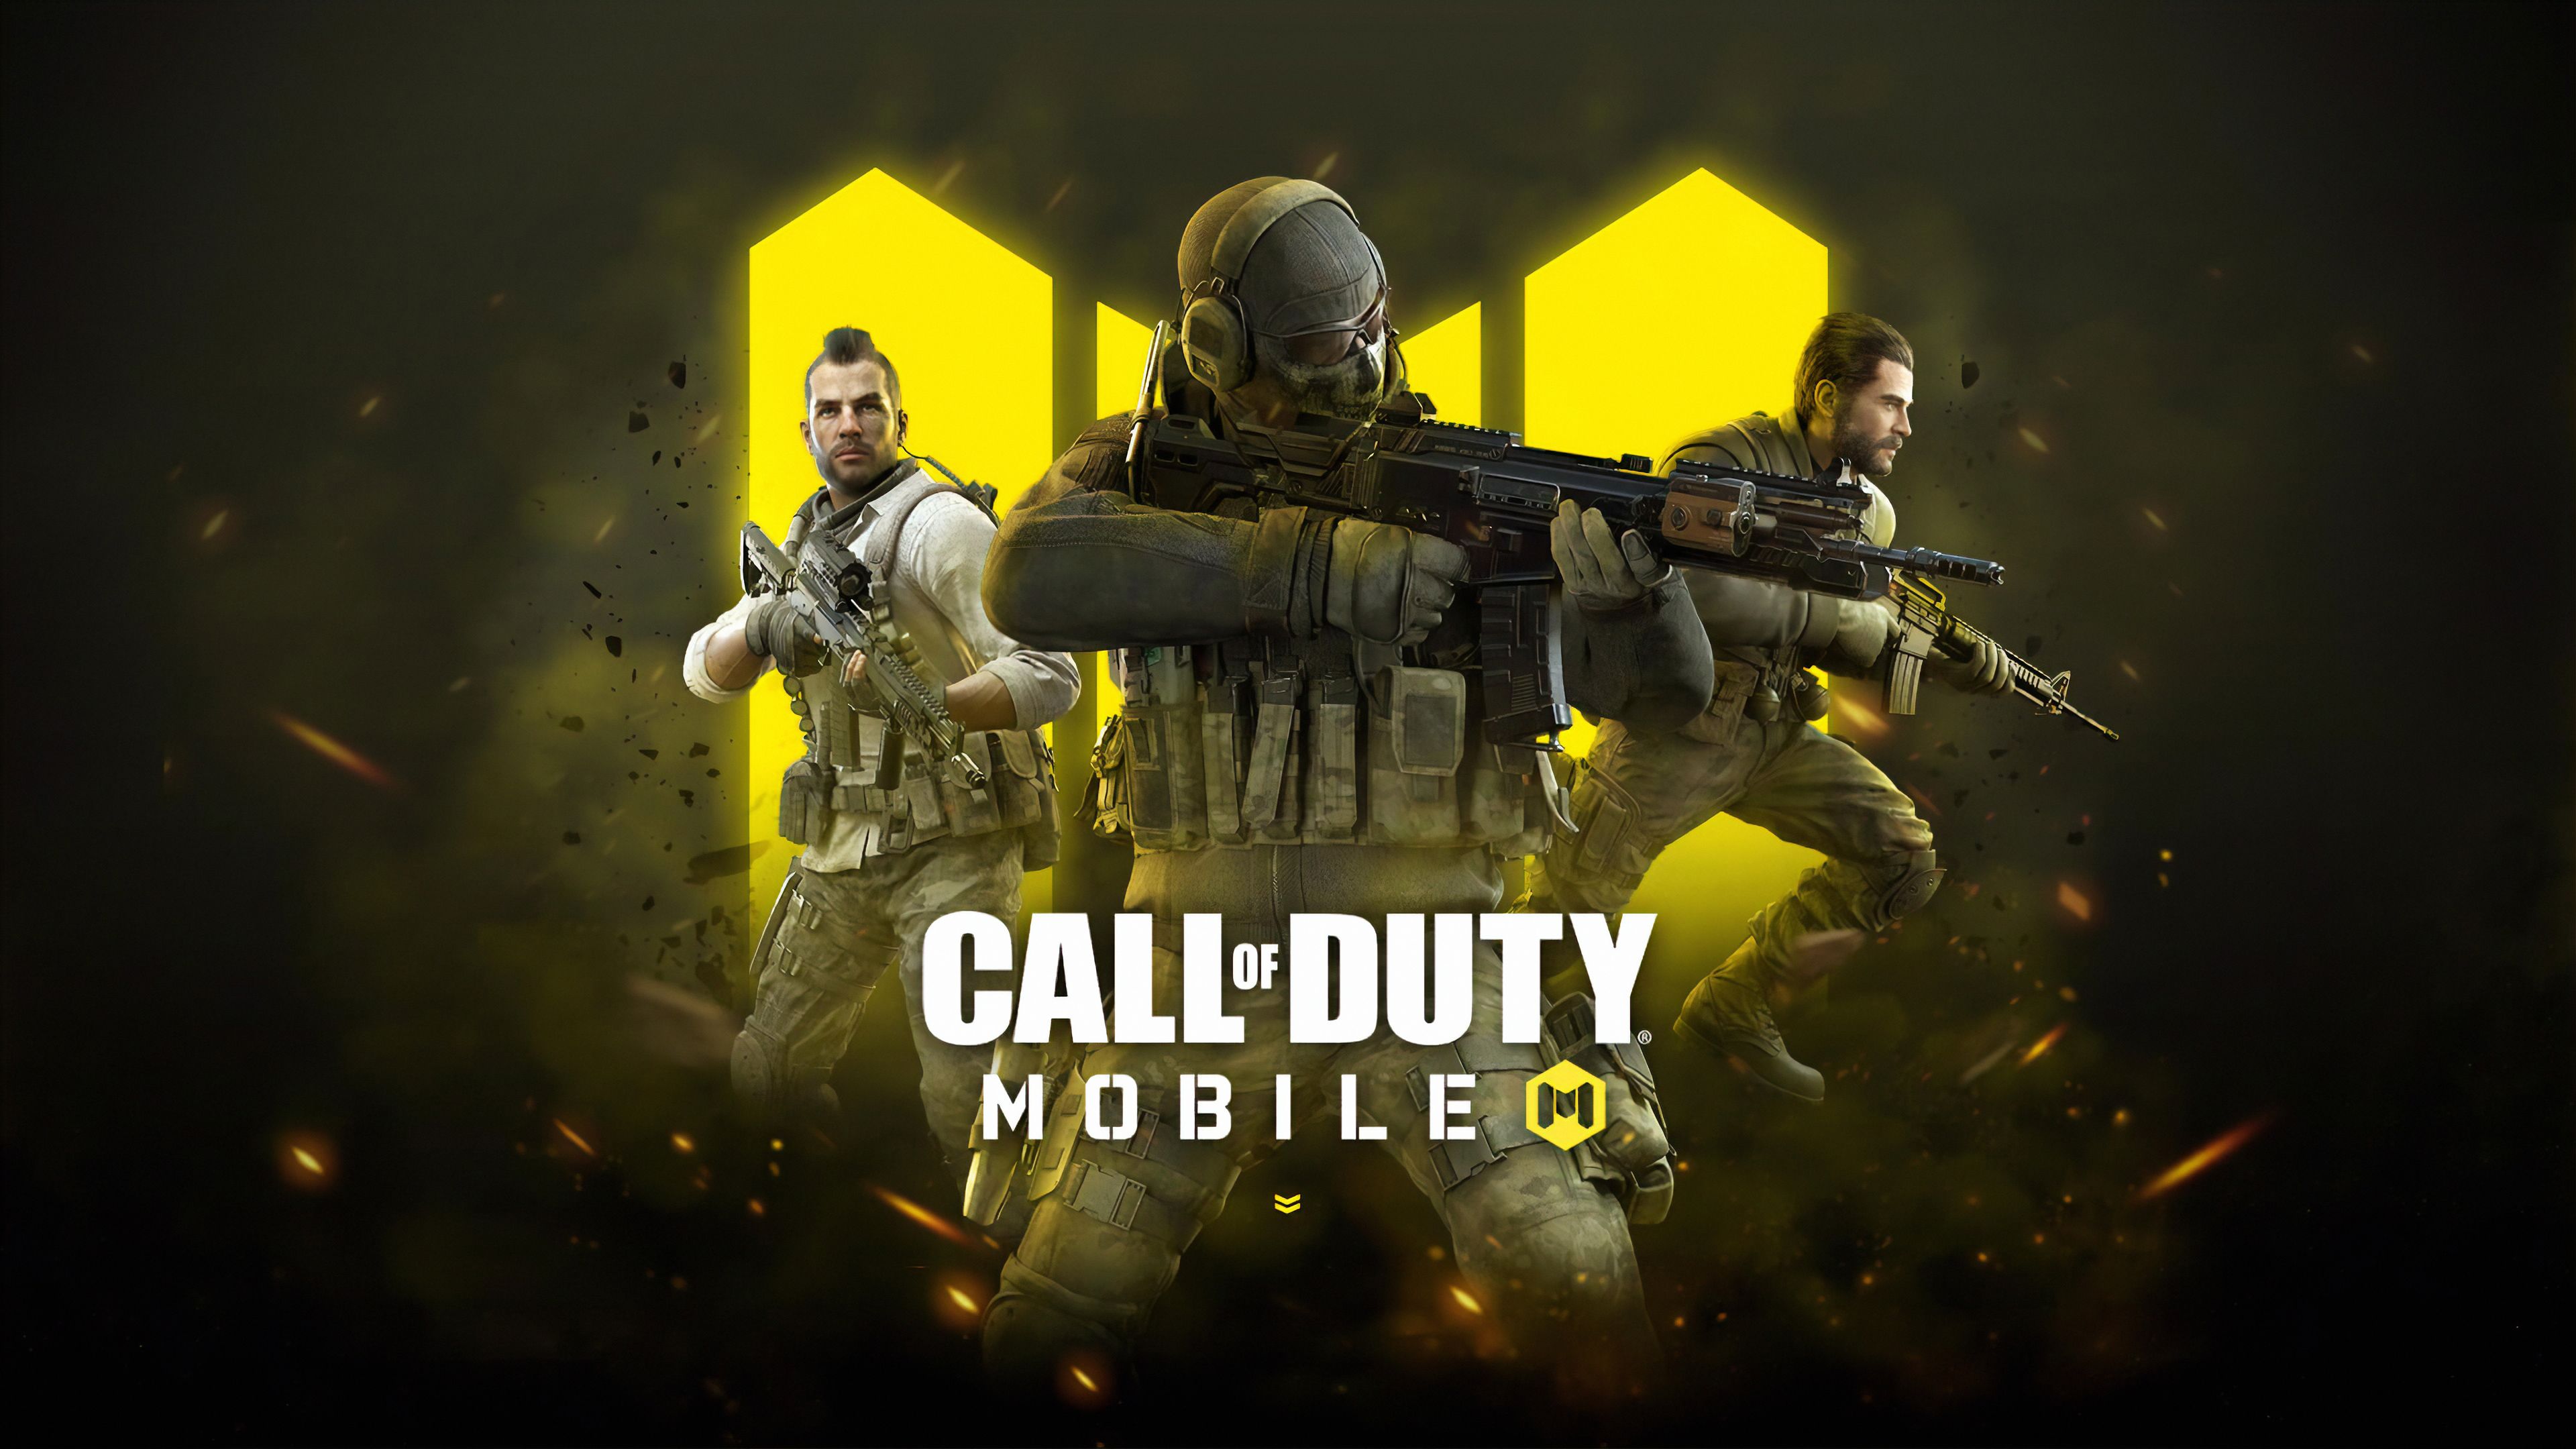 Call of Duty Mobile 4K Wallpaper, Android games, iOS games, Games